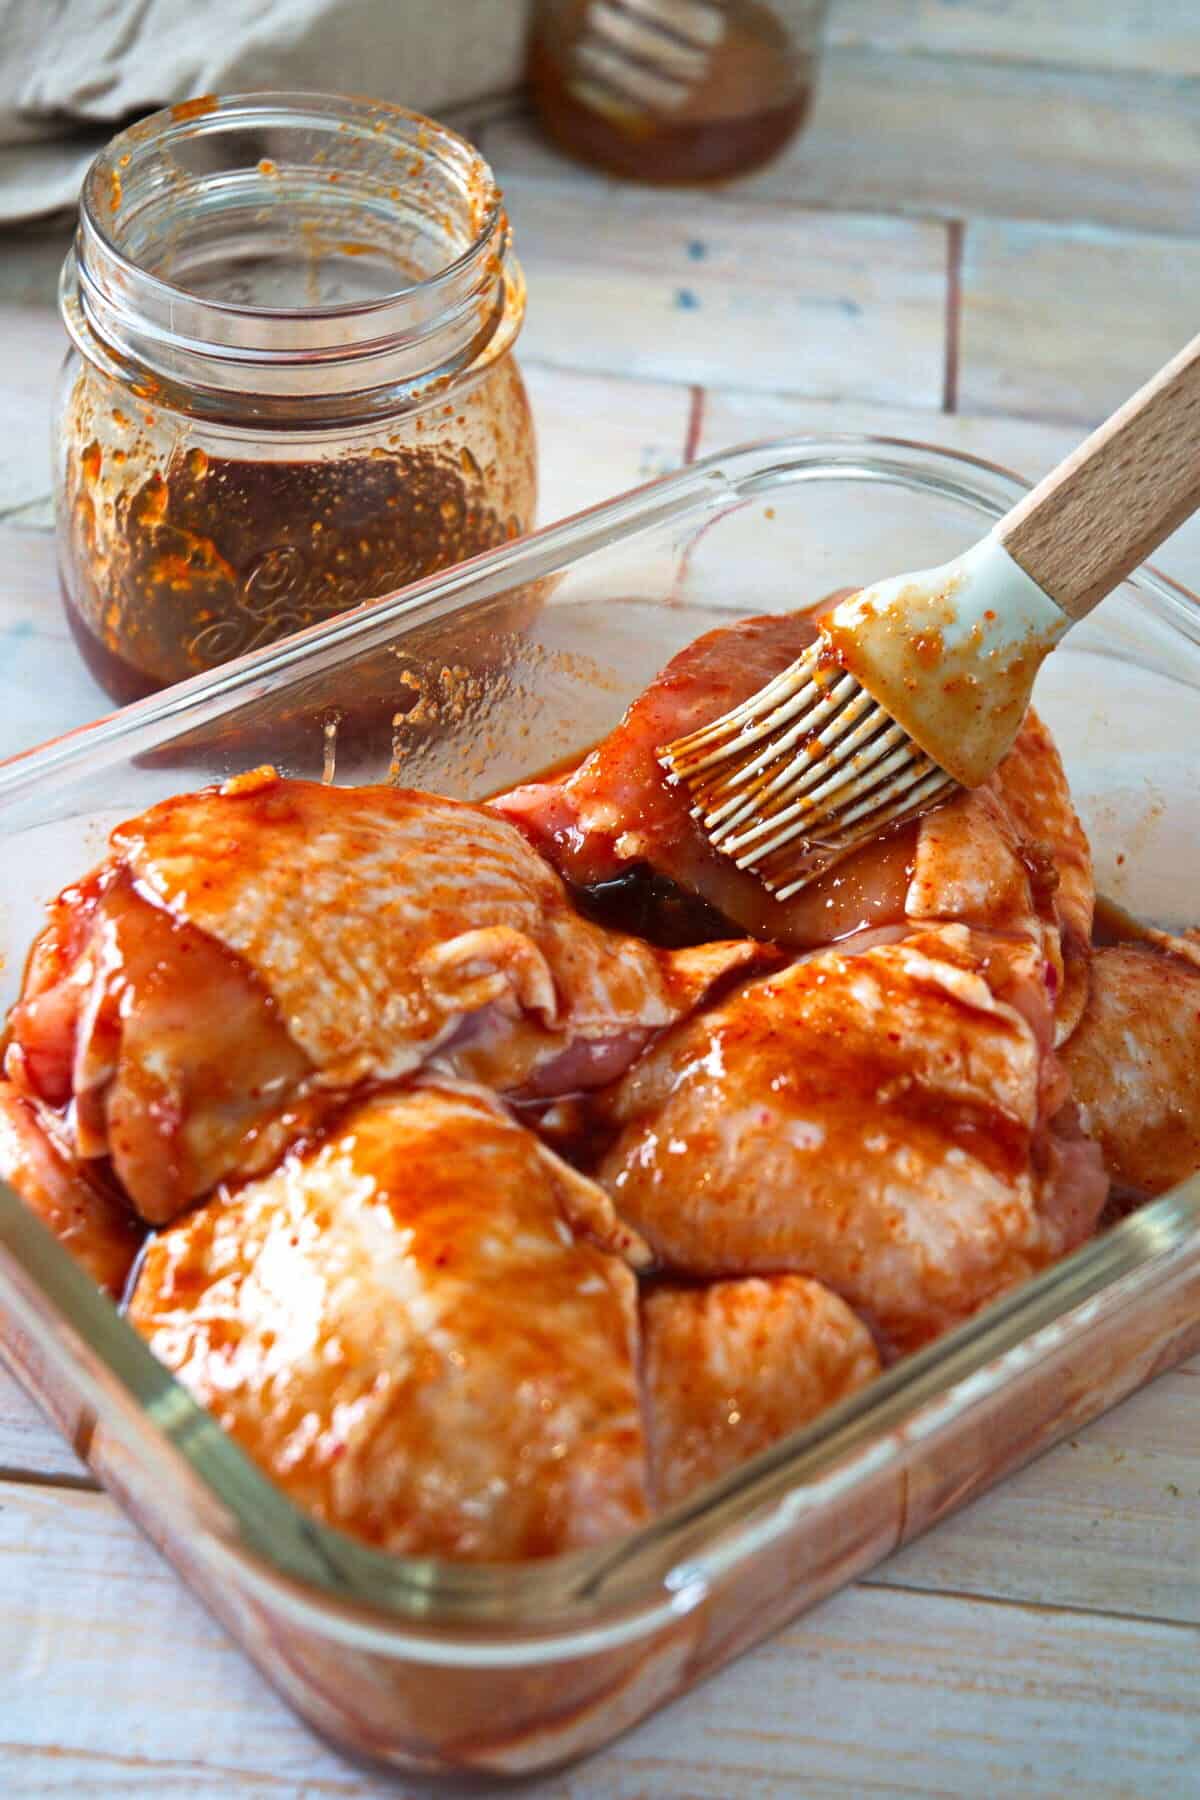 Chicken thighs in a marinade in glass container with silicone brush, wooden background.